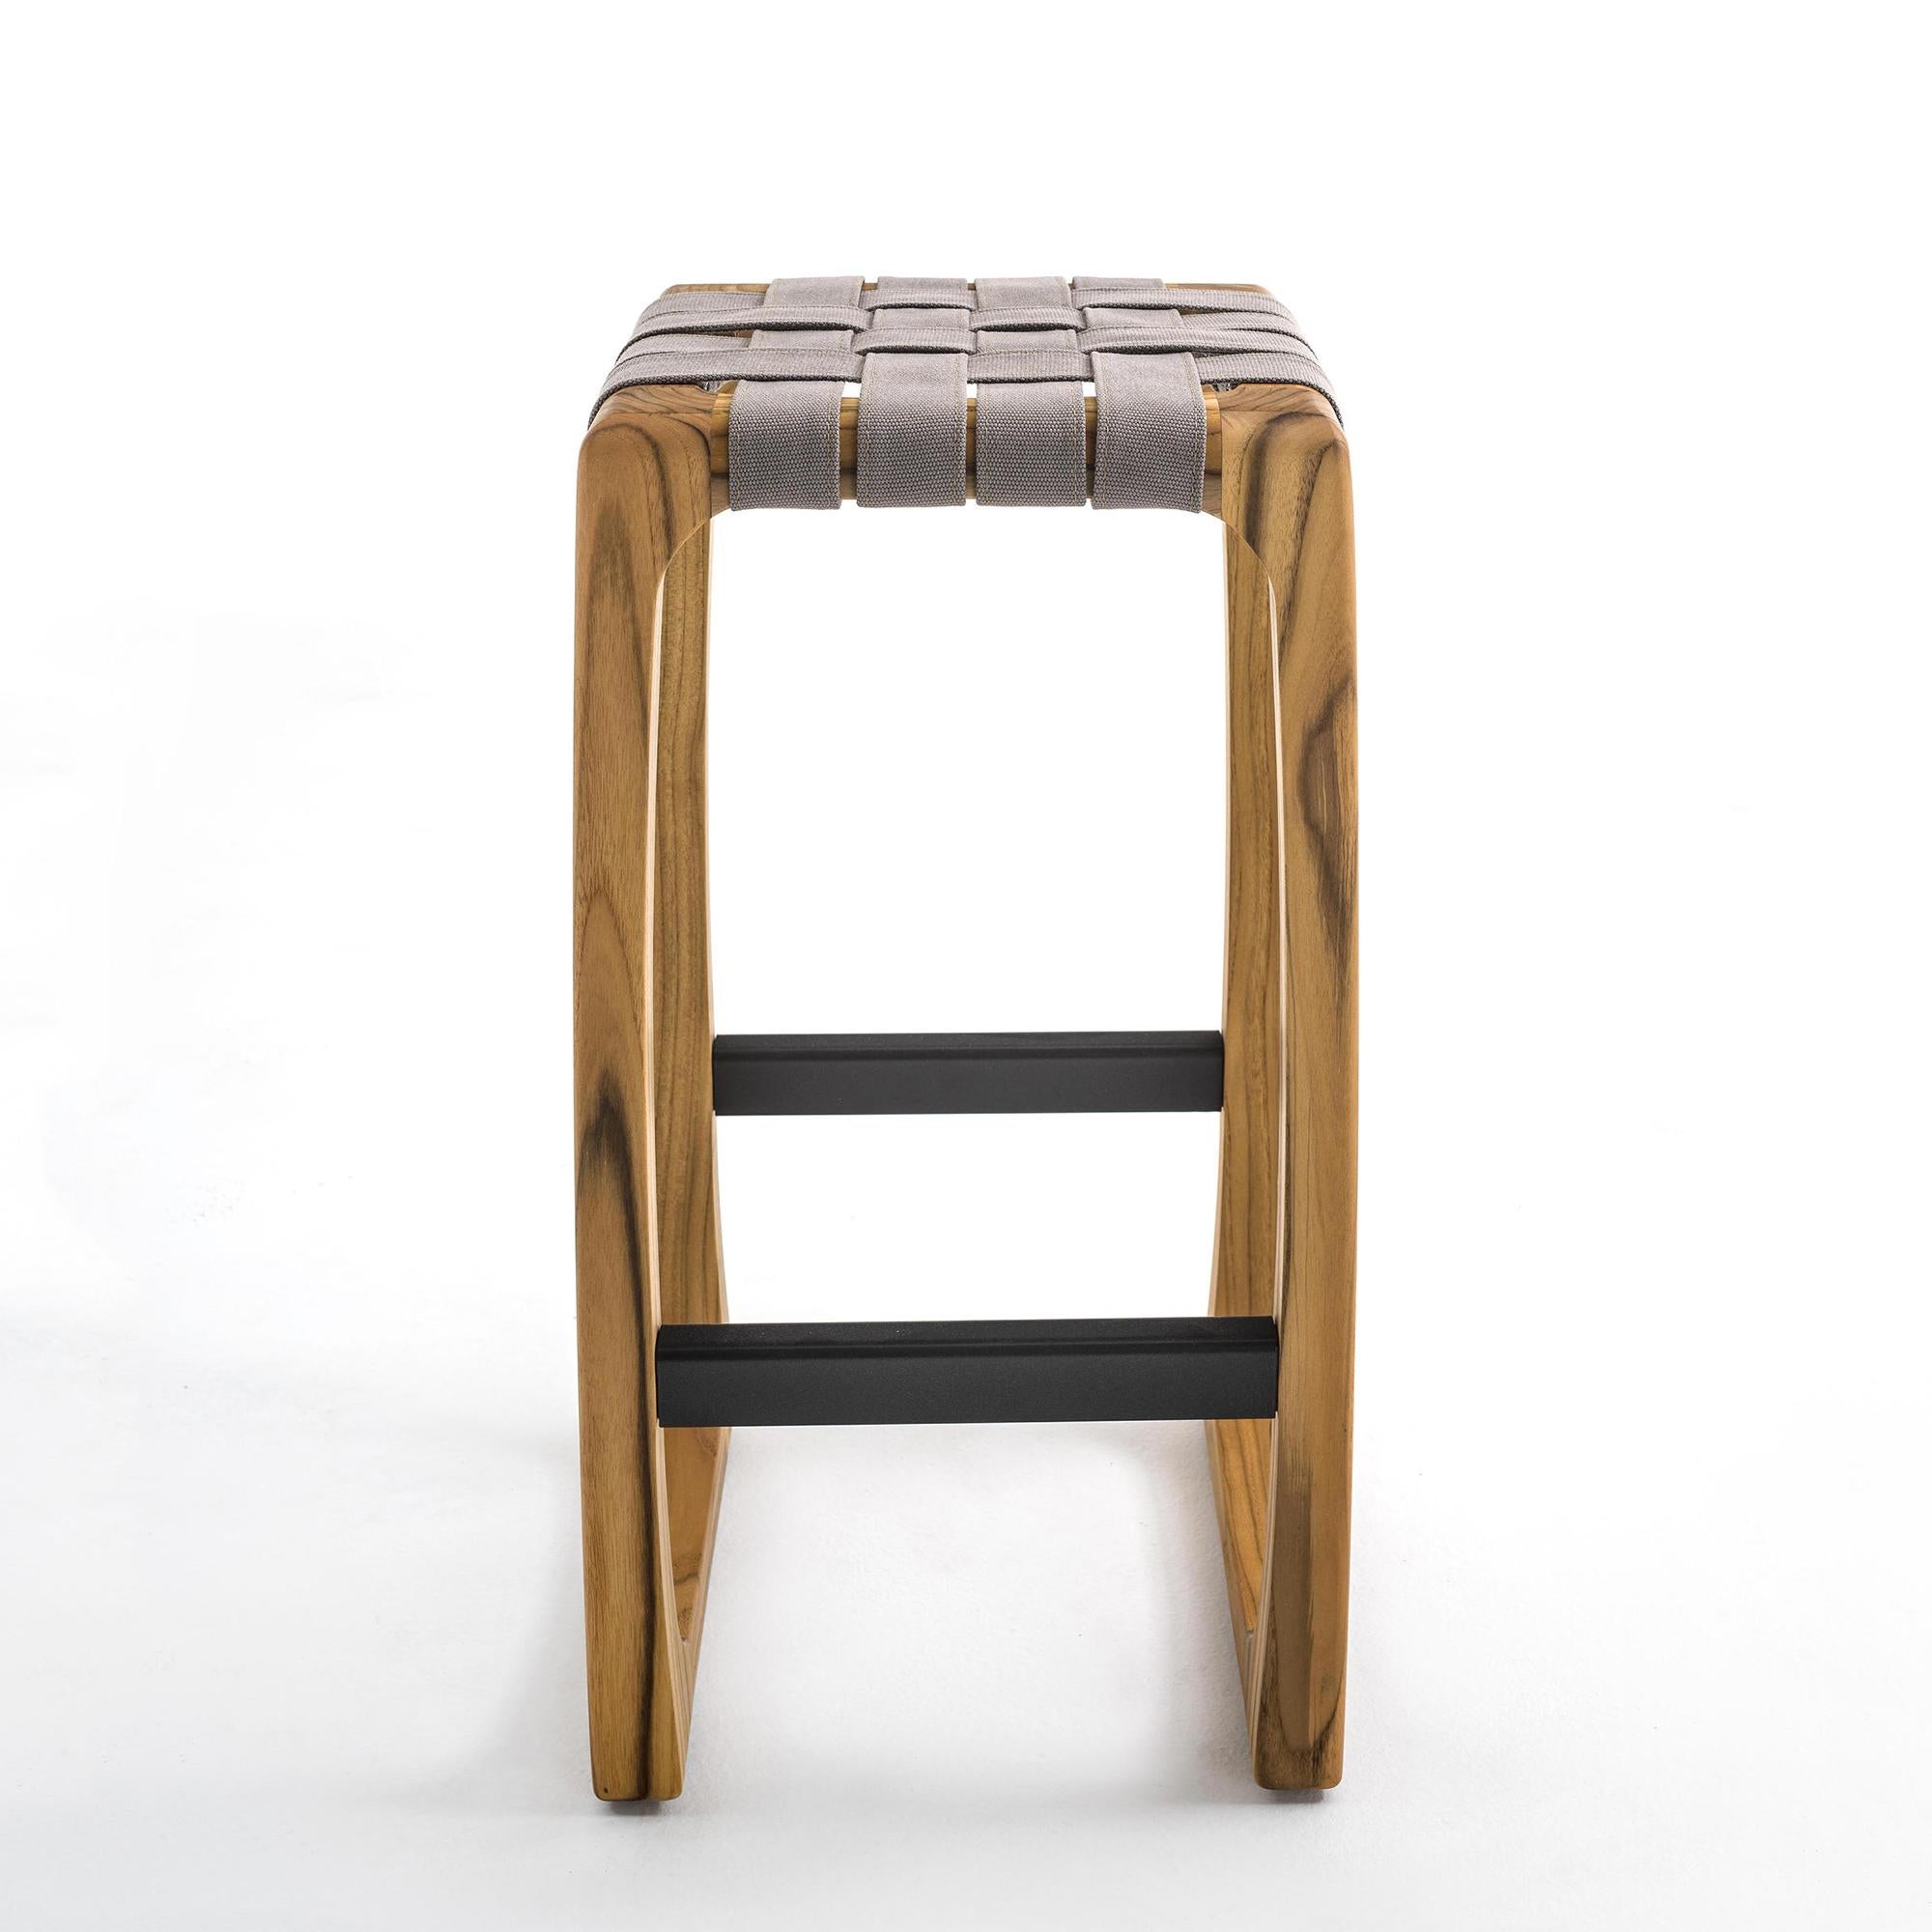 Stool Webbing Outdoor with structure in solid
natural teak wood. Upholstered and covered with
special outdoor fabric in light grey finish.
Treated with natural pine extract wax.